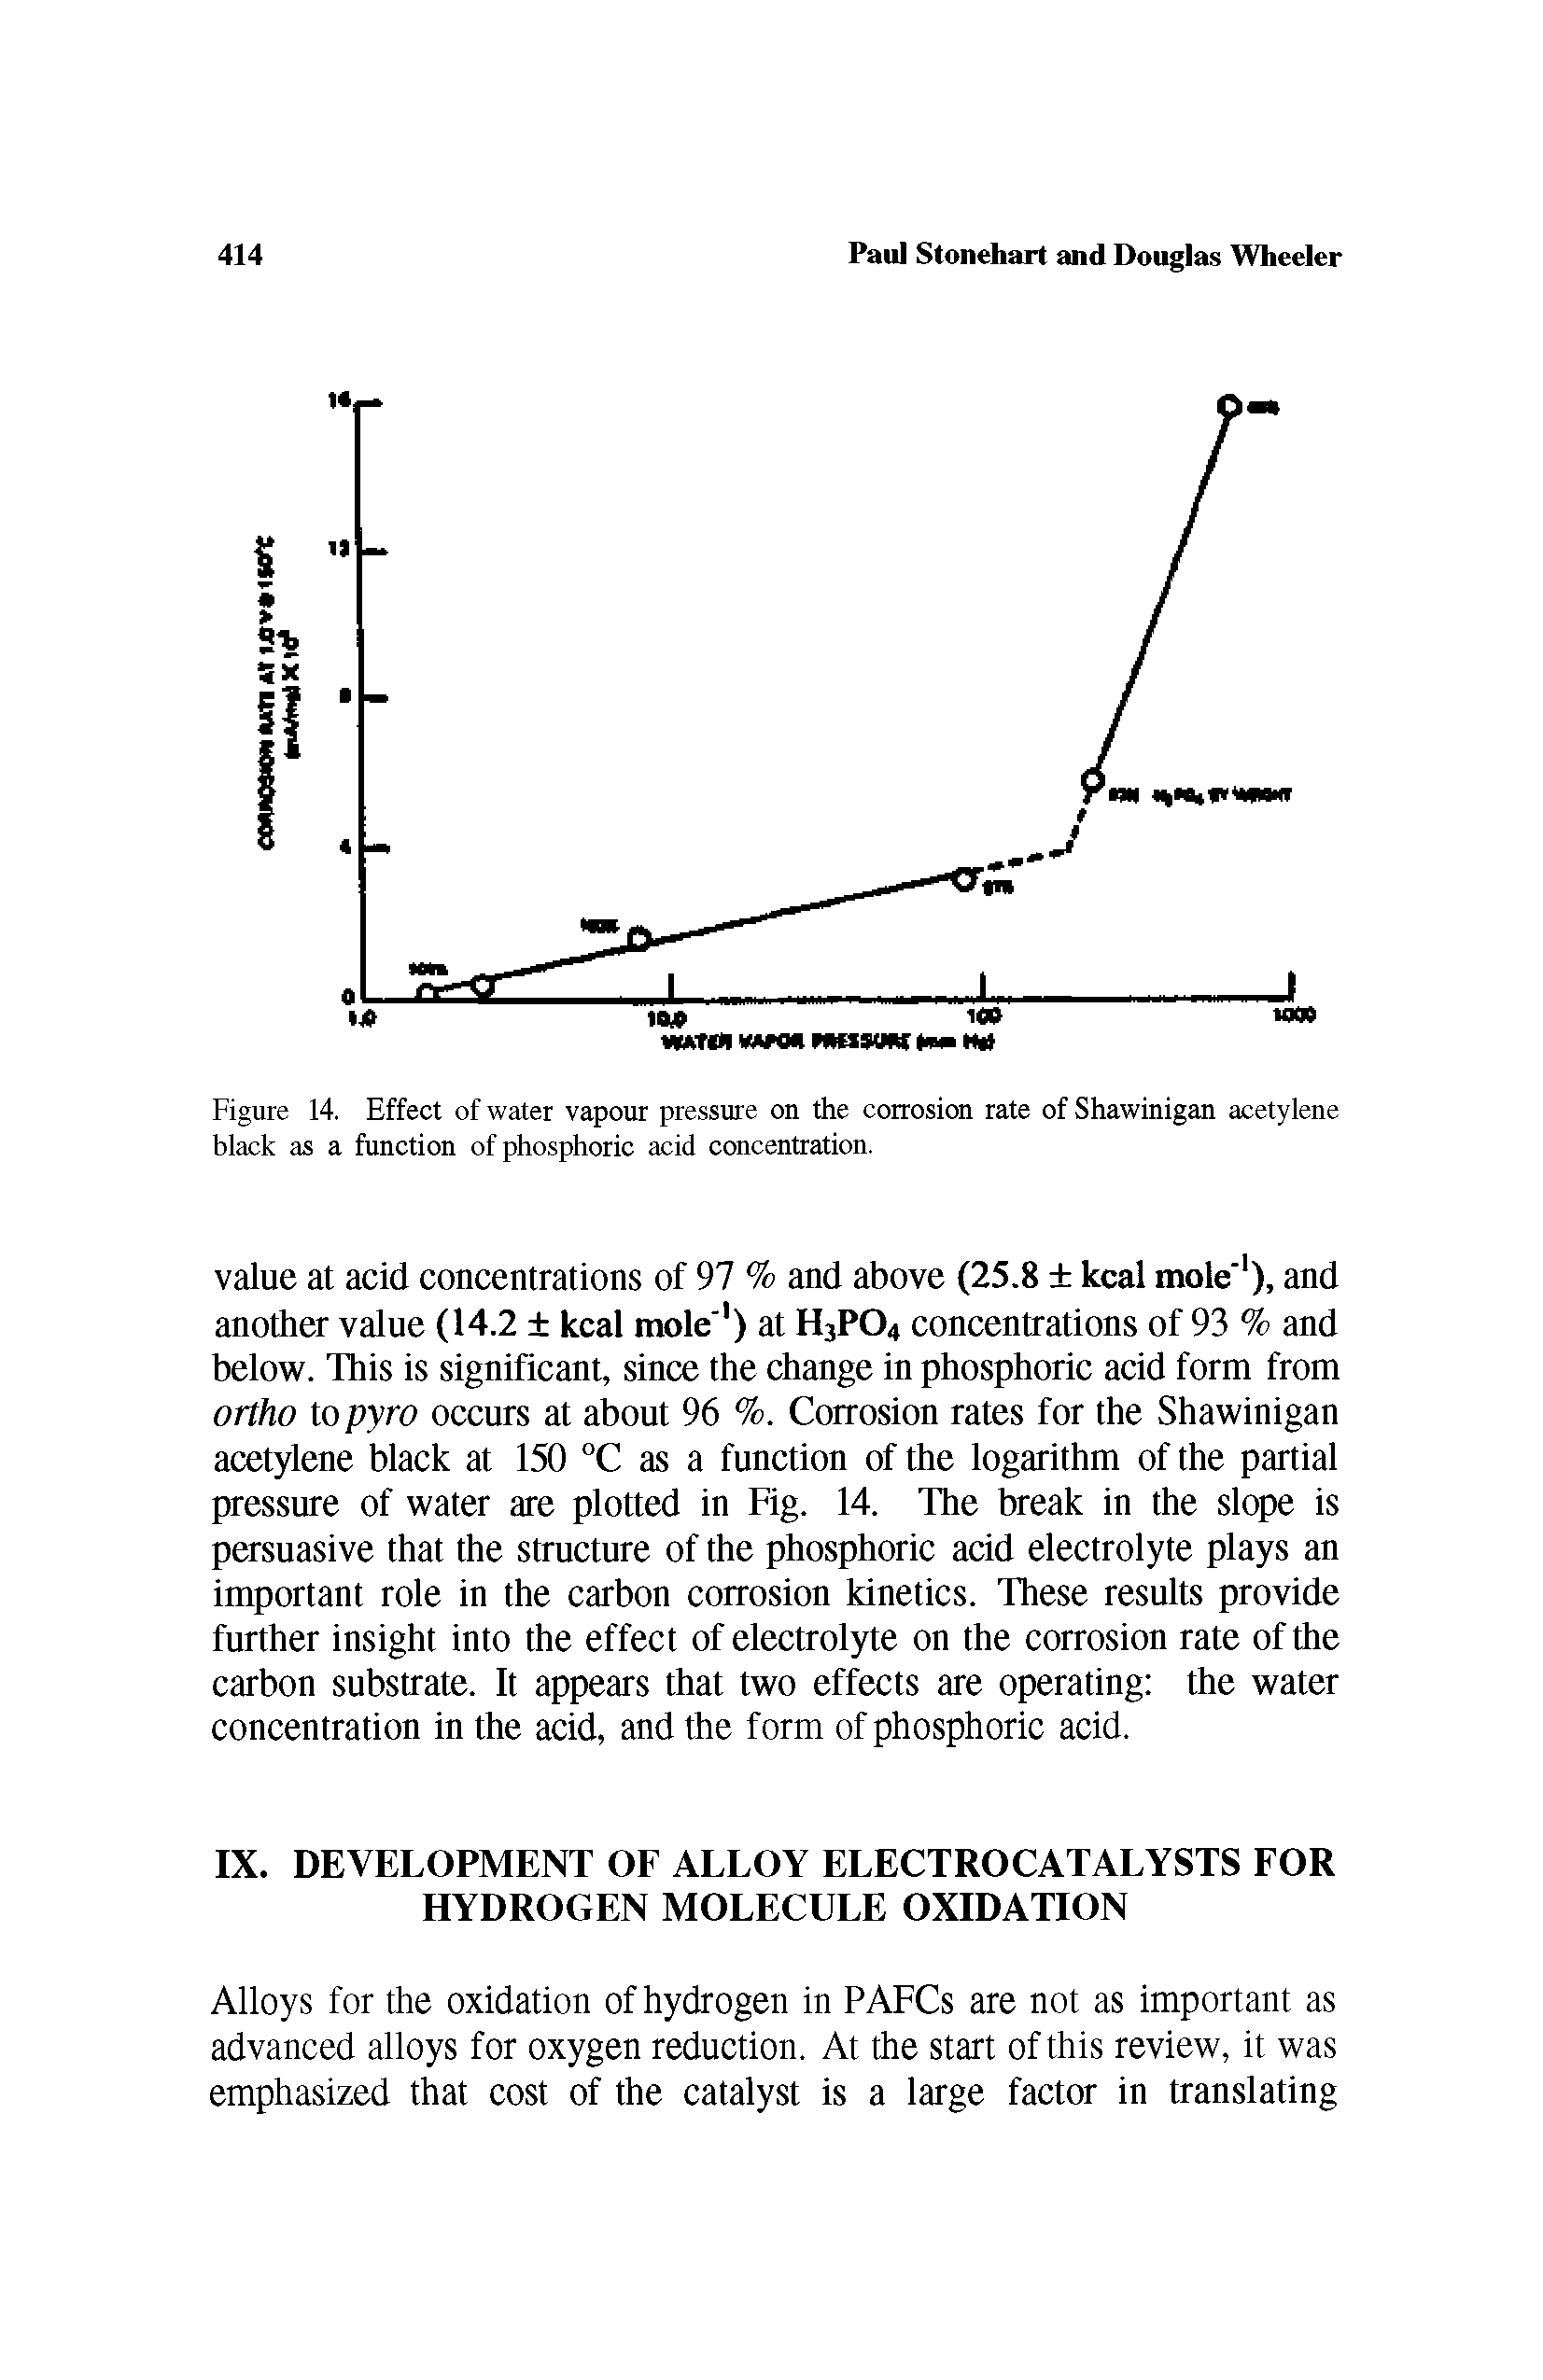 Figure 14. Effect of water vapour pressure on the corrosion rate of Shawinigan acetylene black as a function of phosphoric acid concentration.